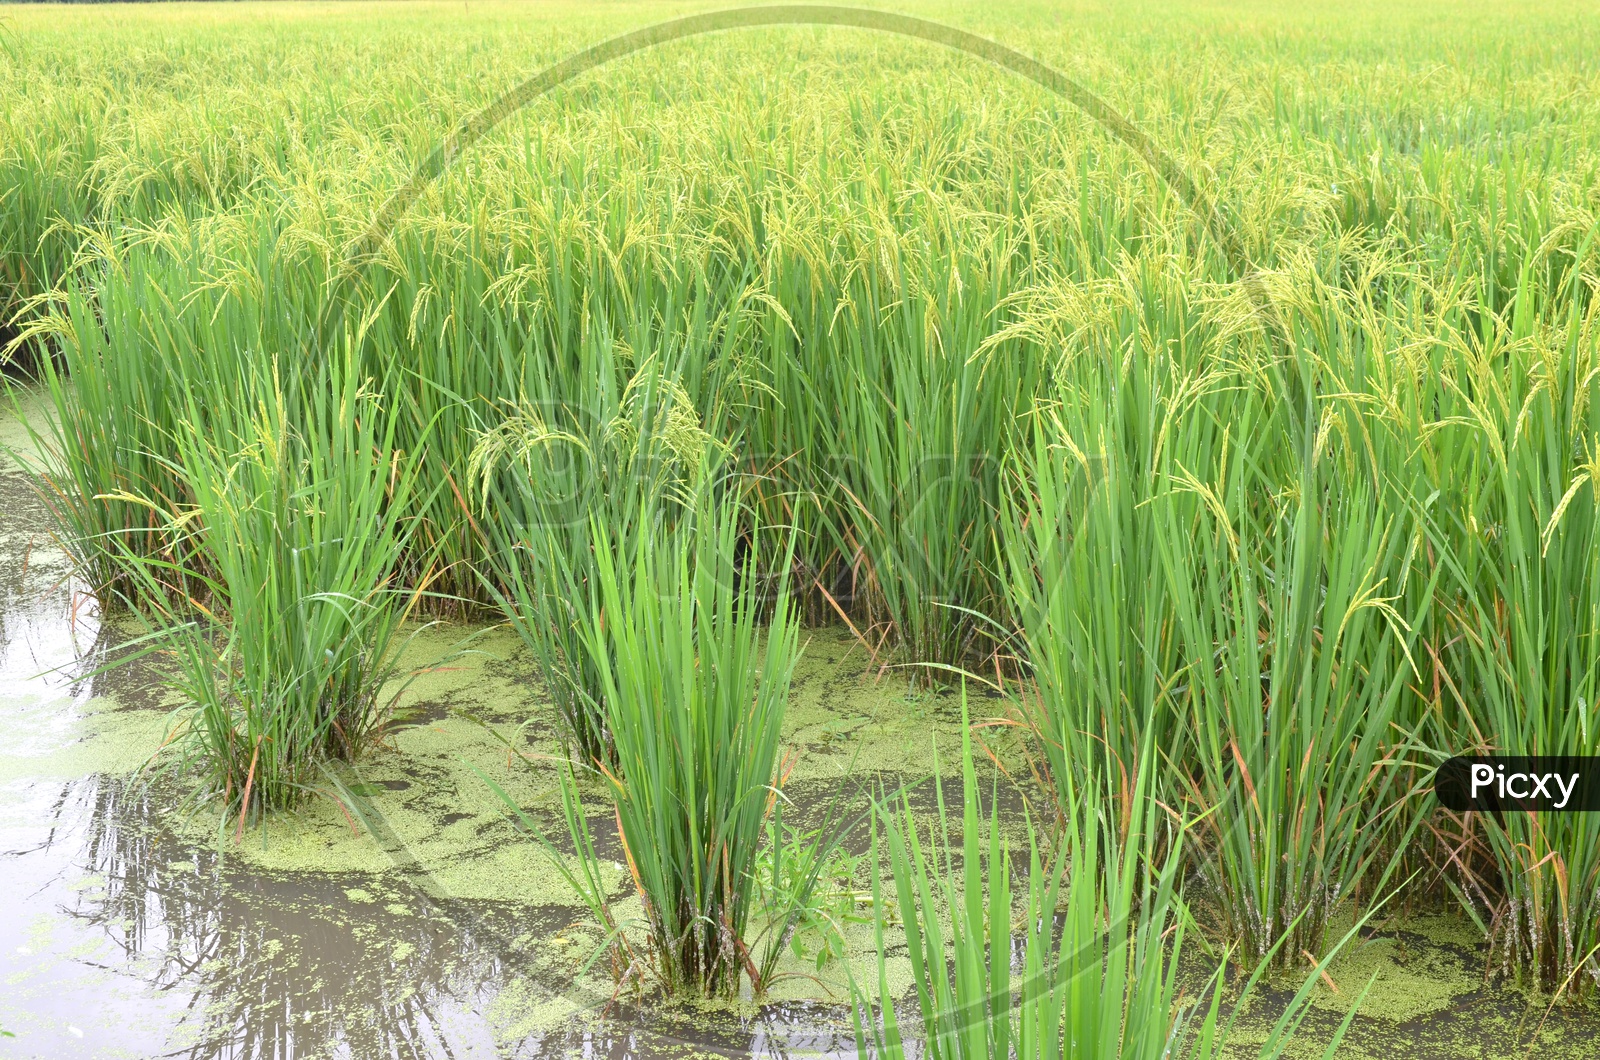 Young Rice Ears In a Paddy Or Rice Agricultural Field